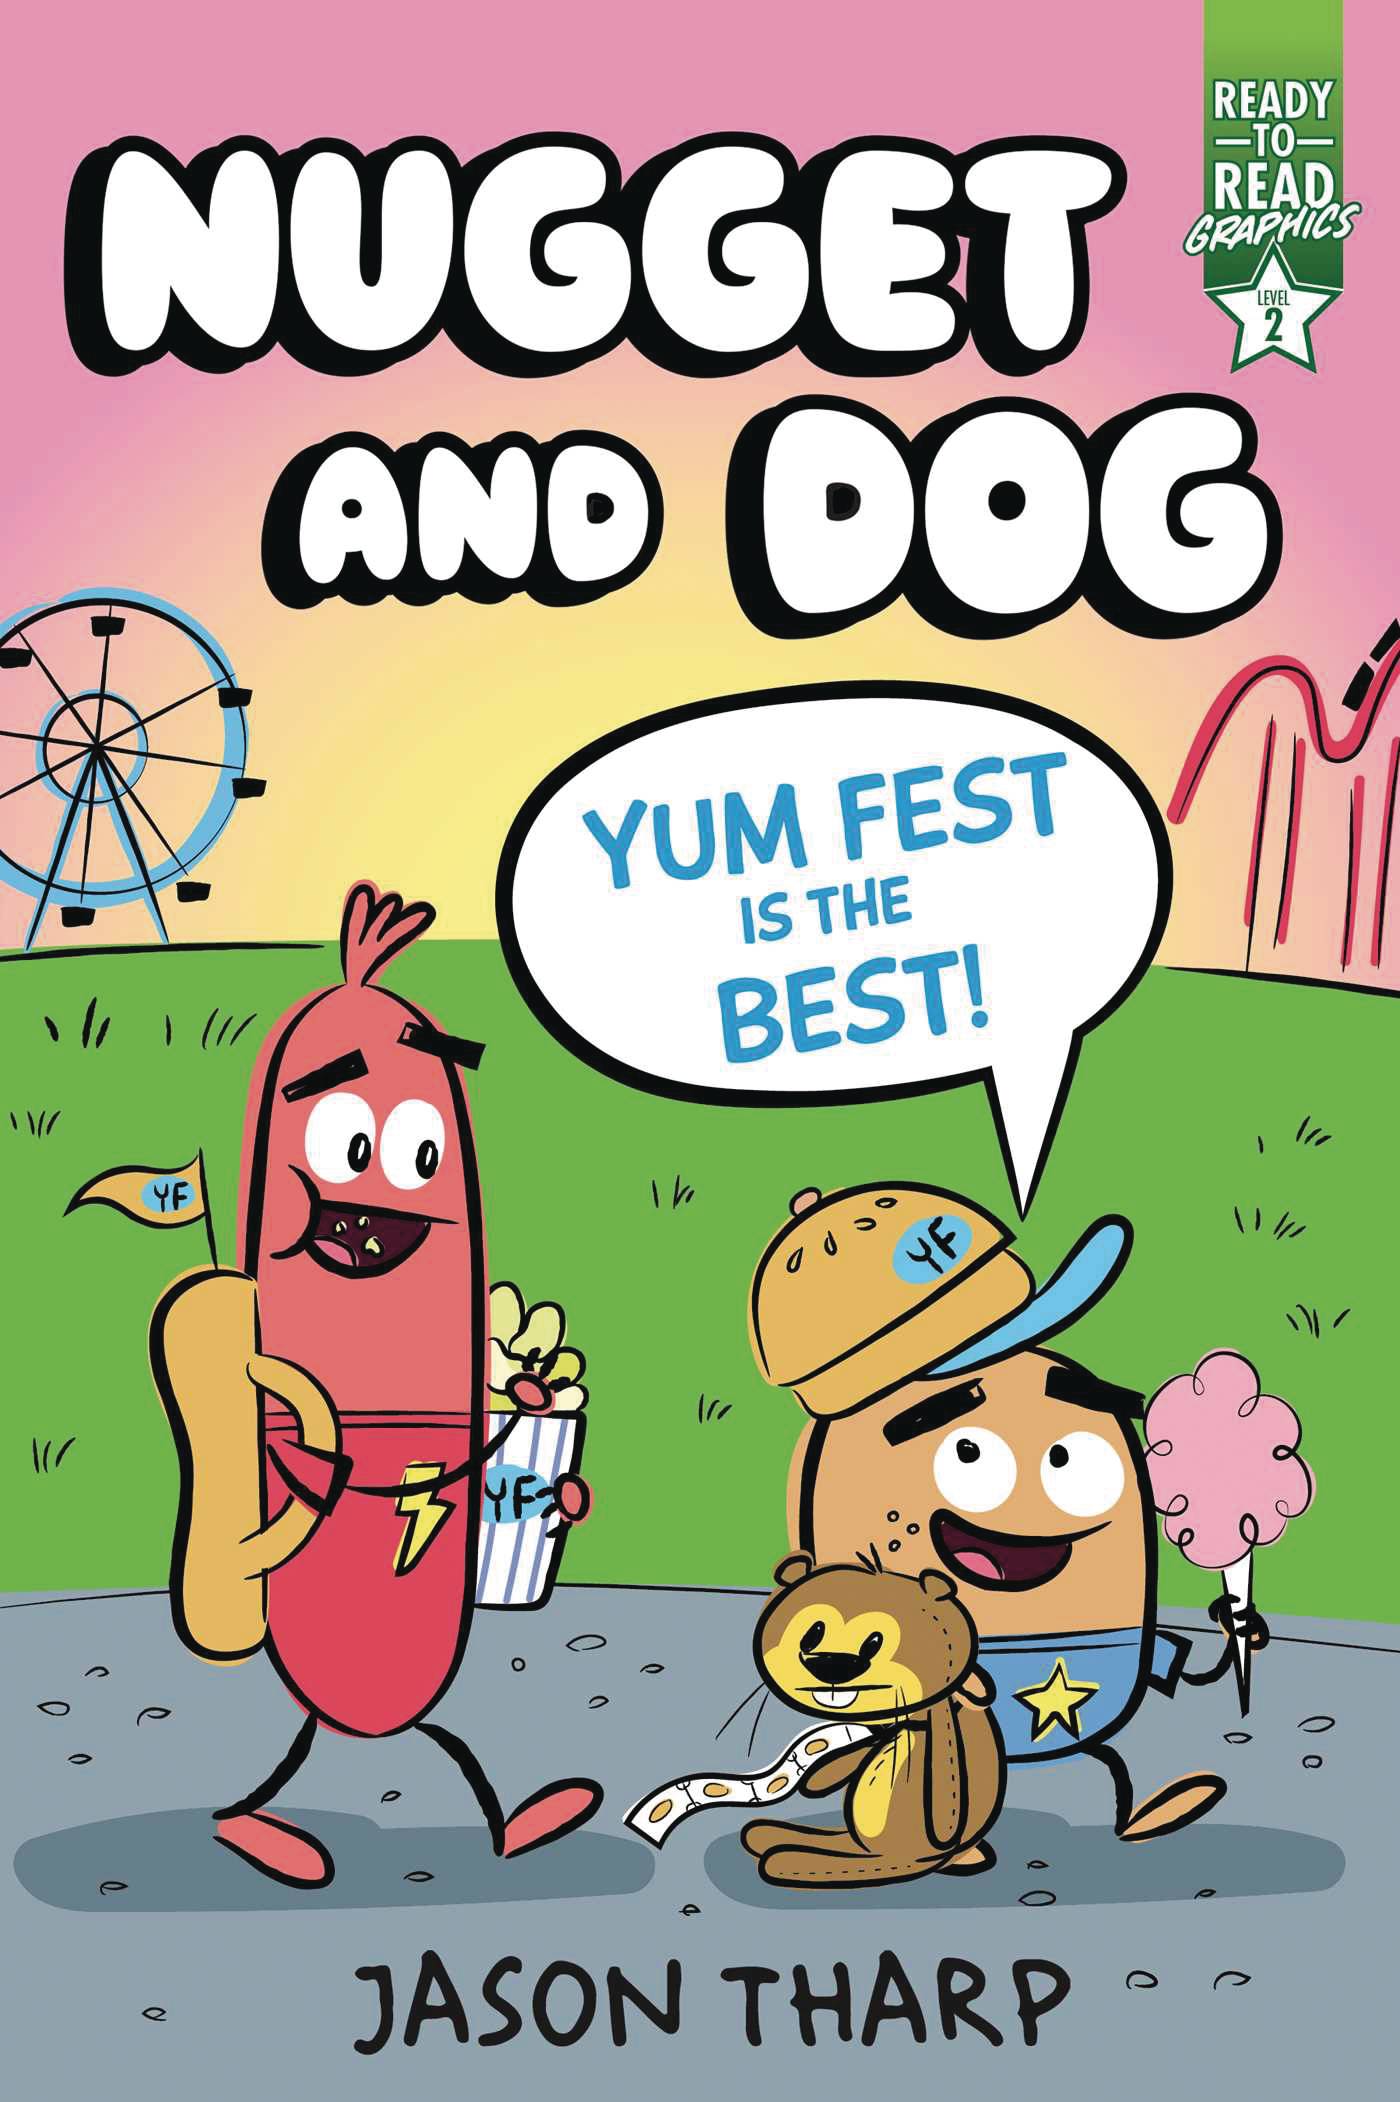 NUGGET AND DOG YR GN YUM FEST IS BEST